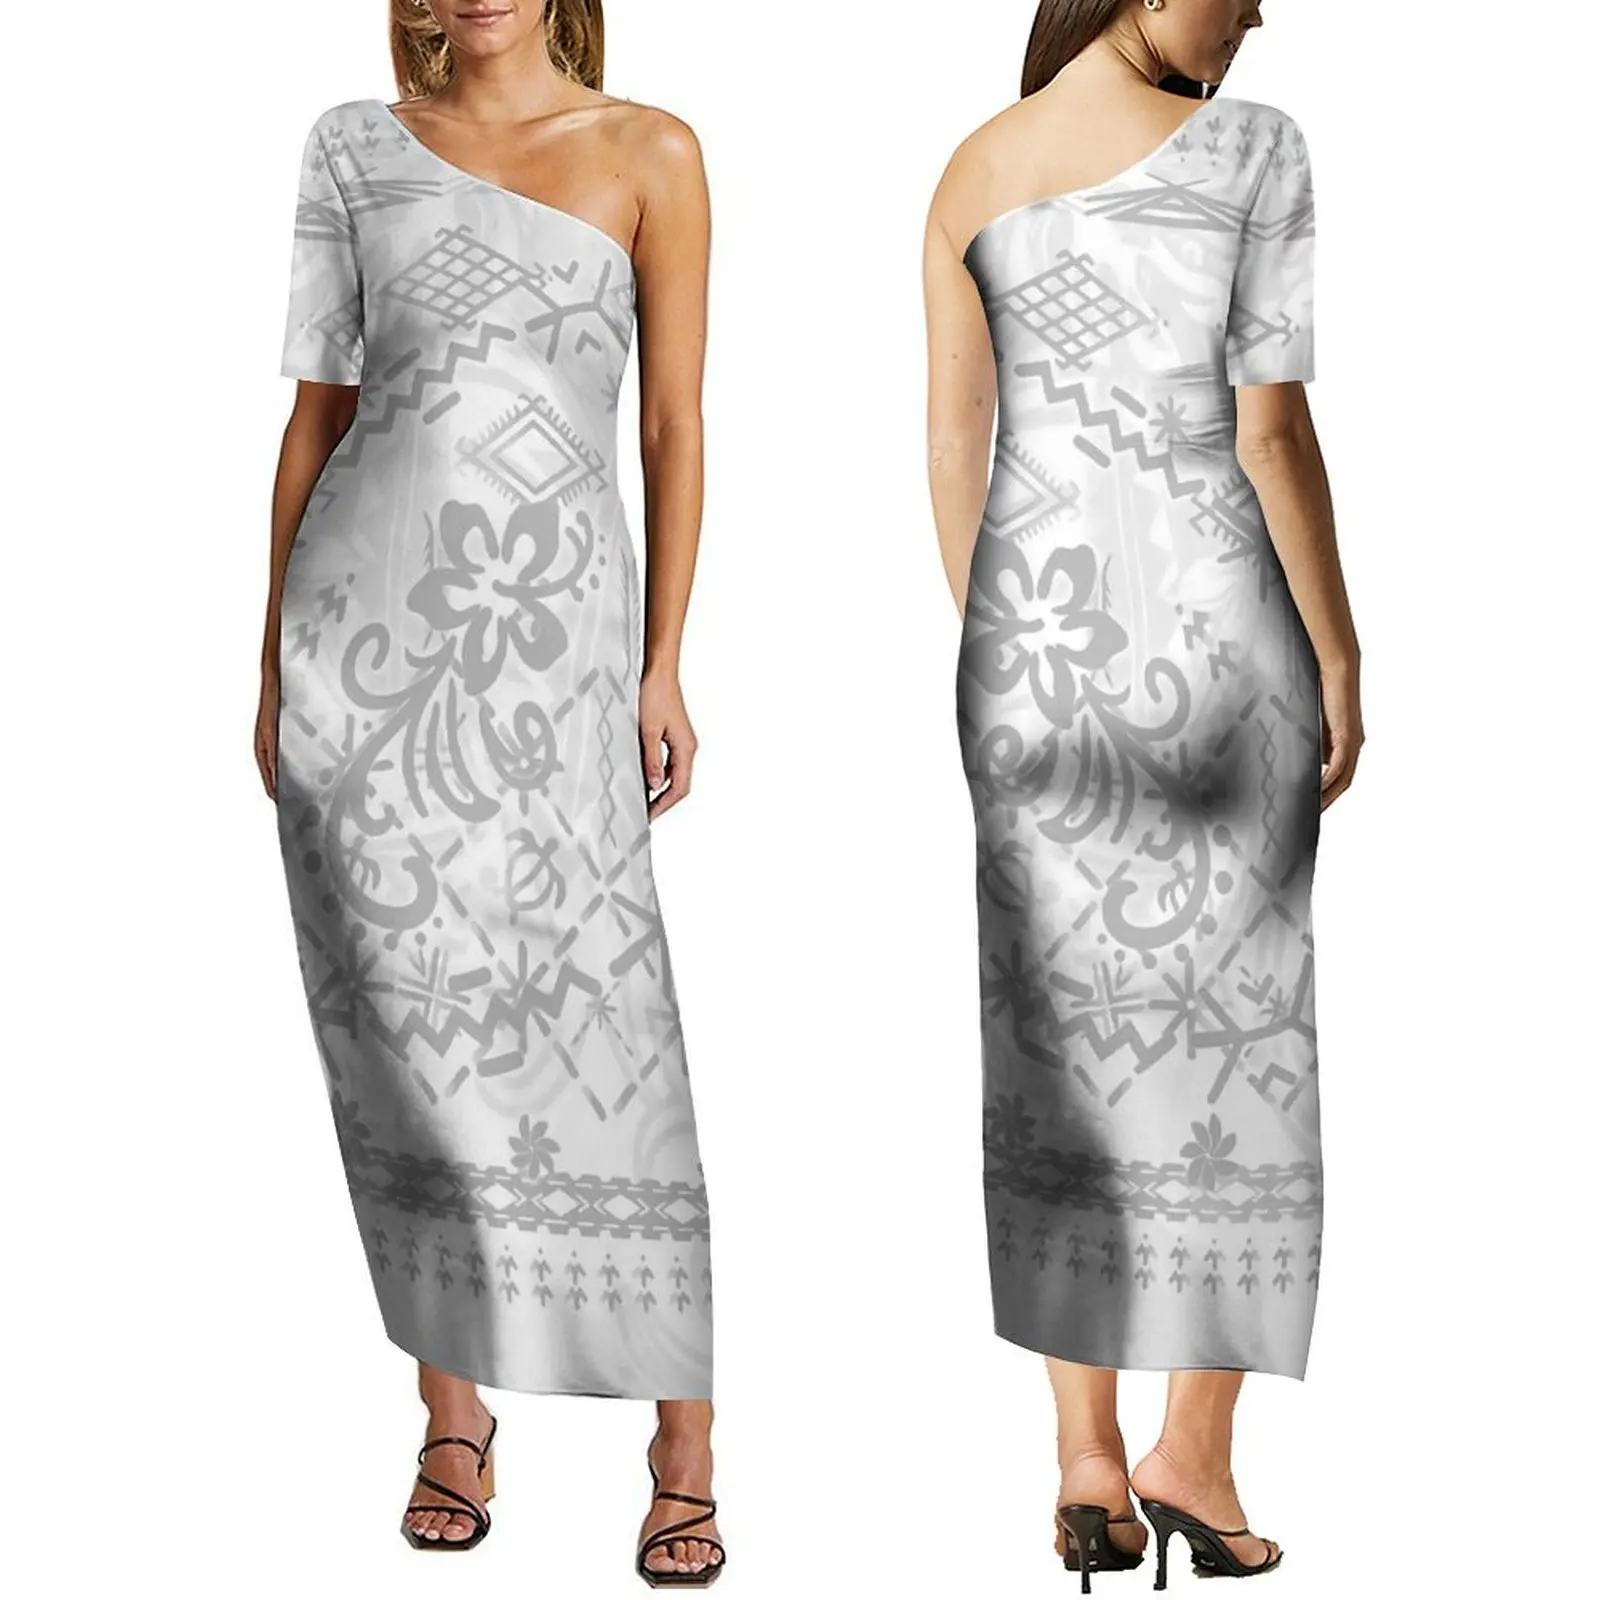 

2024 Summer Mother'S Day Gift Polynesian Tribal Pattern Hawaiian Off-The-Shoulder Dress Samoa Short Sleeve White Floral Dress